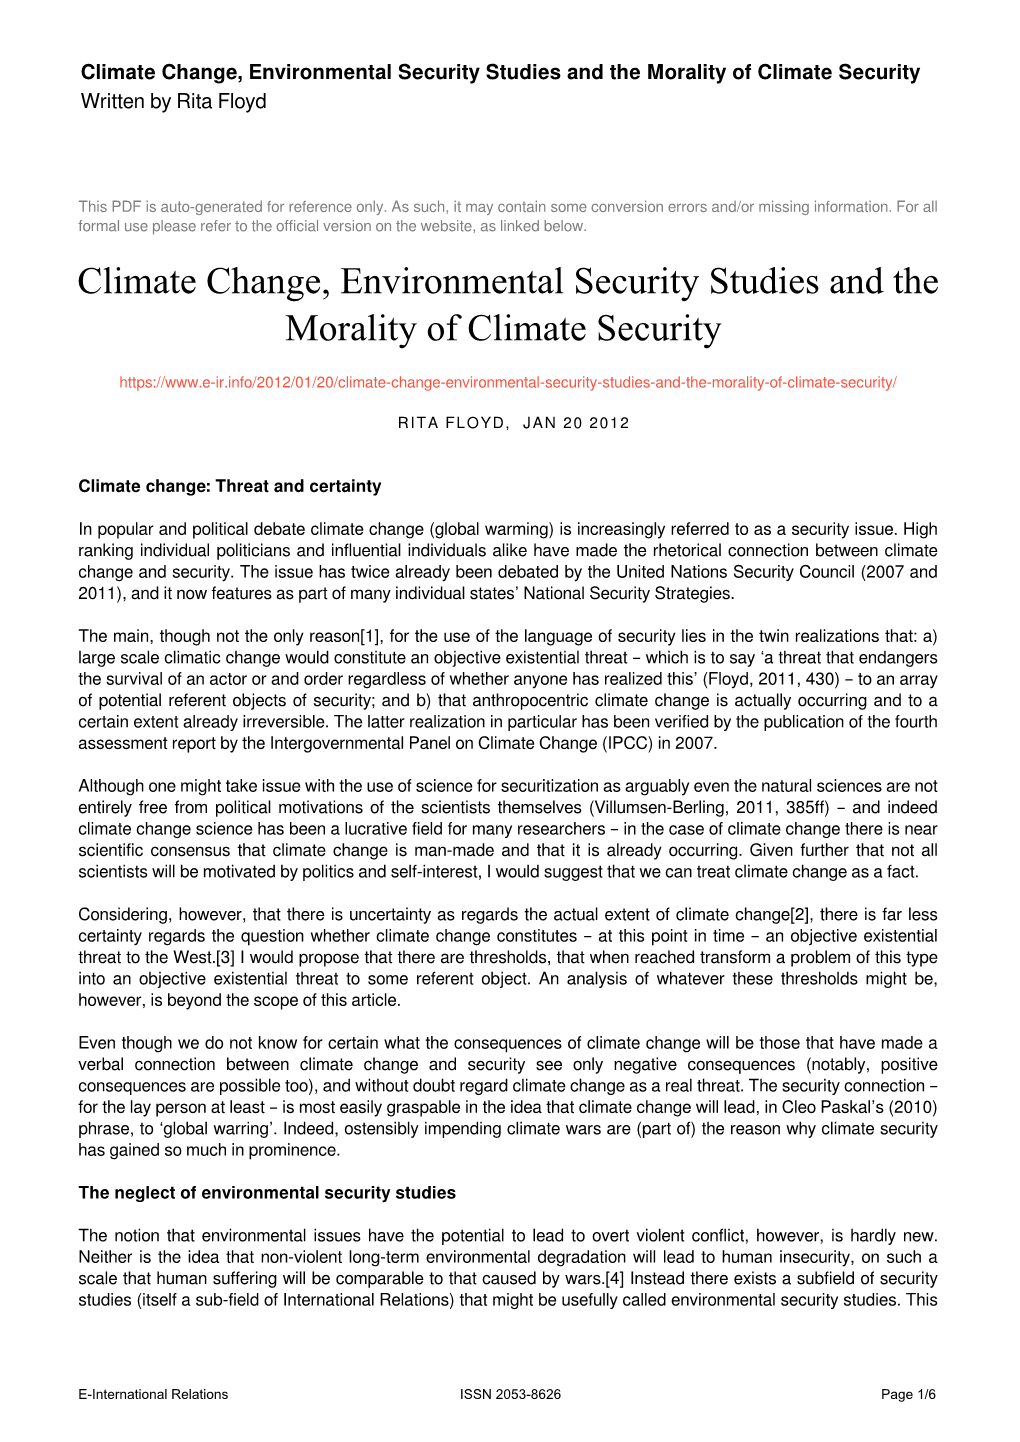 Climate Change, Environmental Security Studies and the Morality of Climate Security Written by Rita Floyd